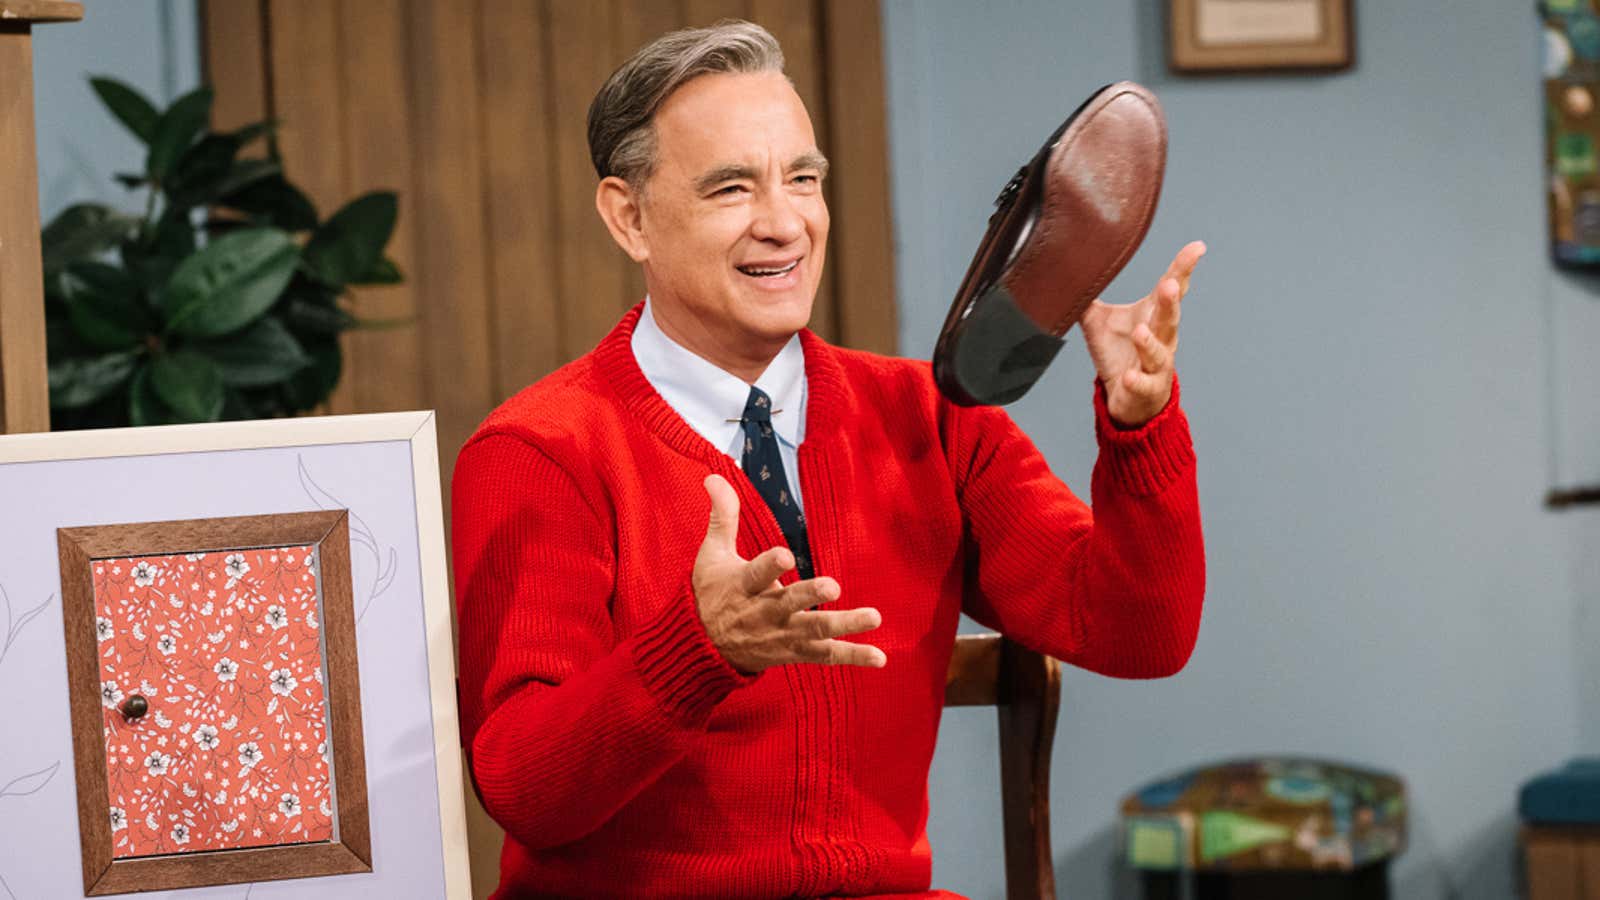 Tom Hanks channels the essential goodness of Mr. Rogers in <i>A Beautiful Day In The Neighborhood</i>